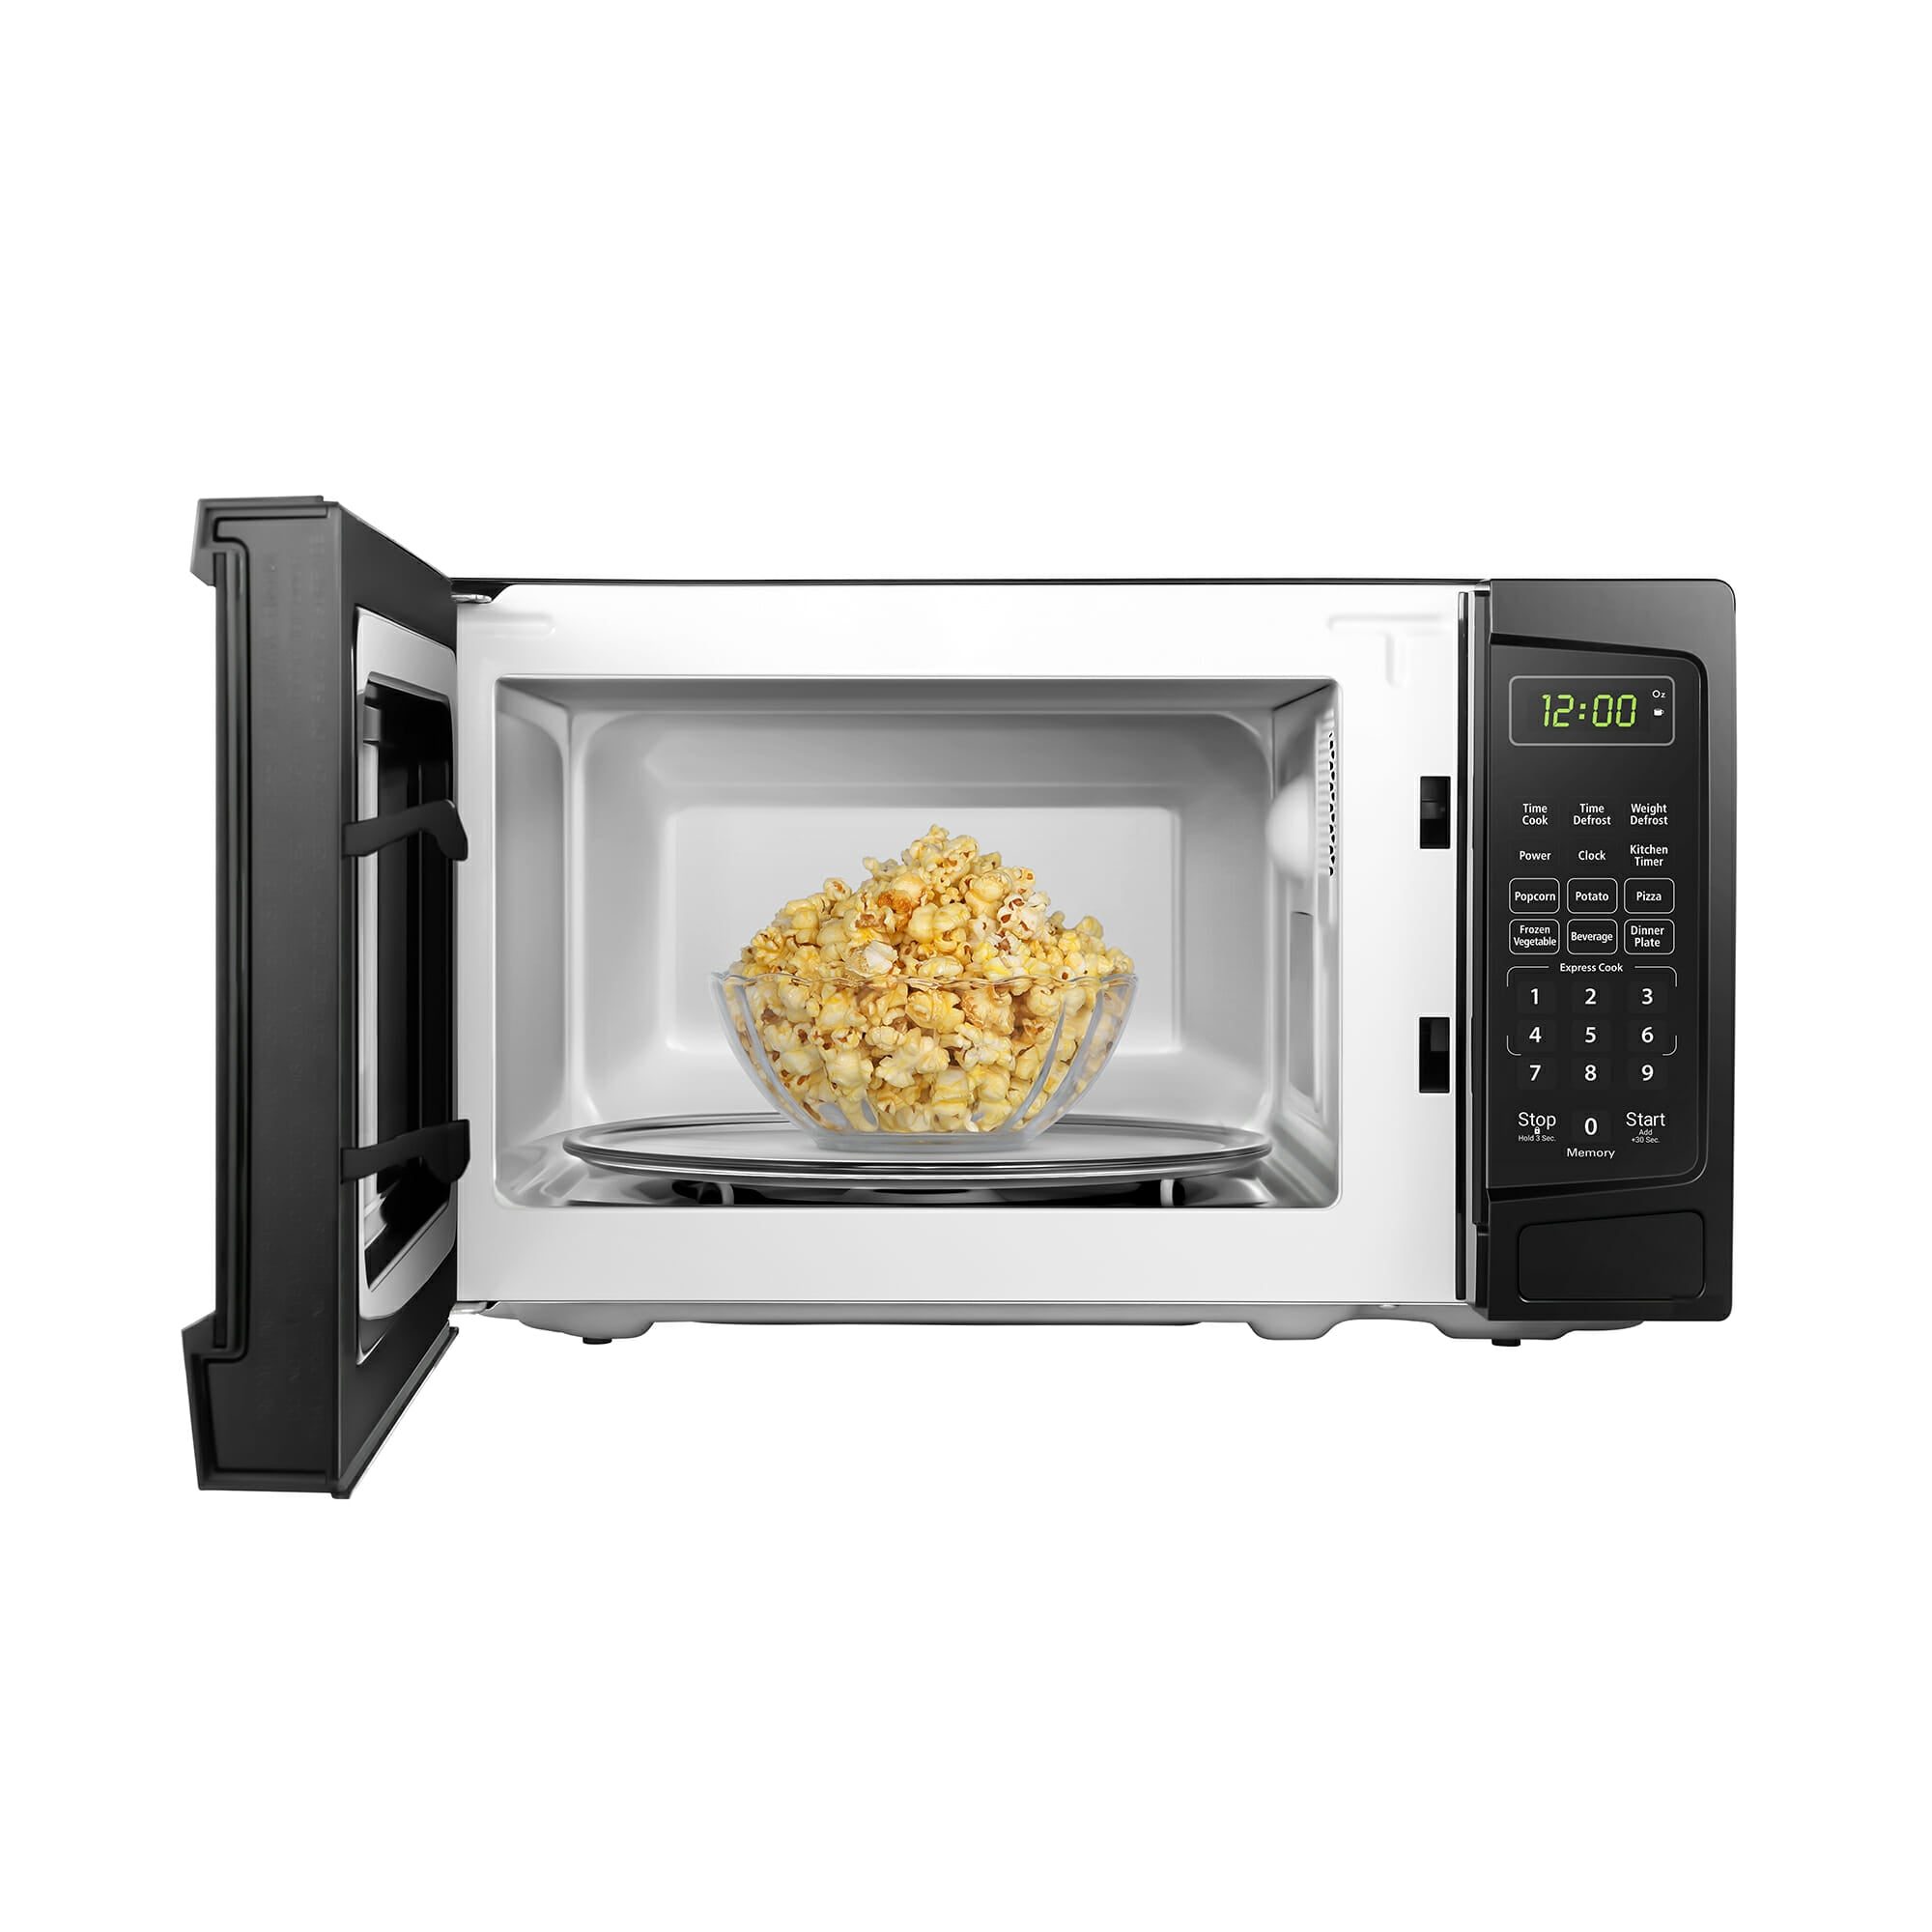 Danby - 0.7 cu. Ft  Counter top Microwave in Black - DBMW0720BBB